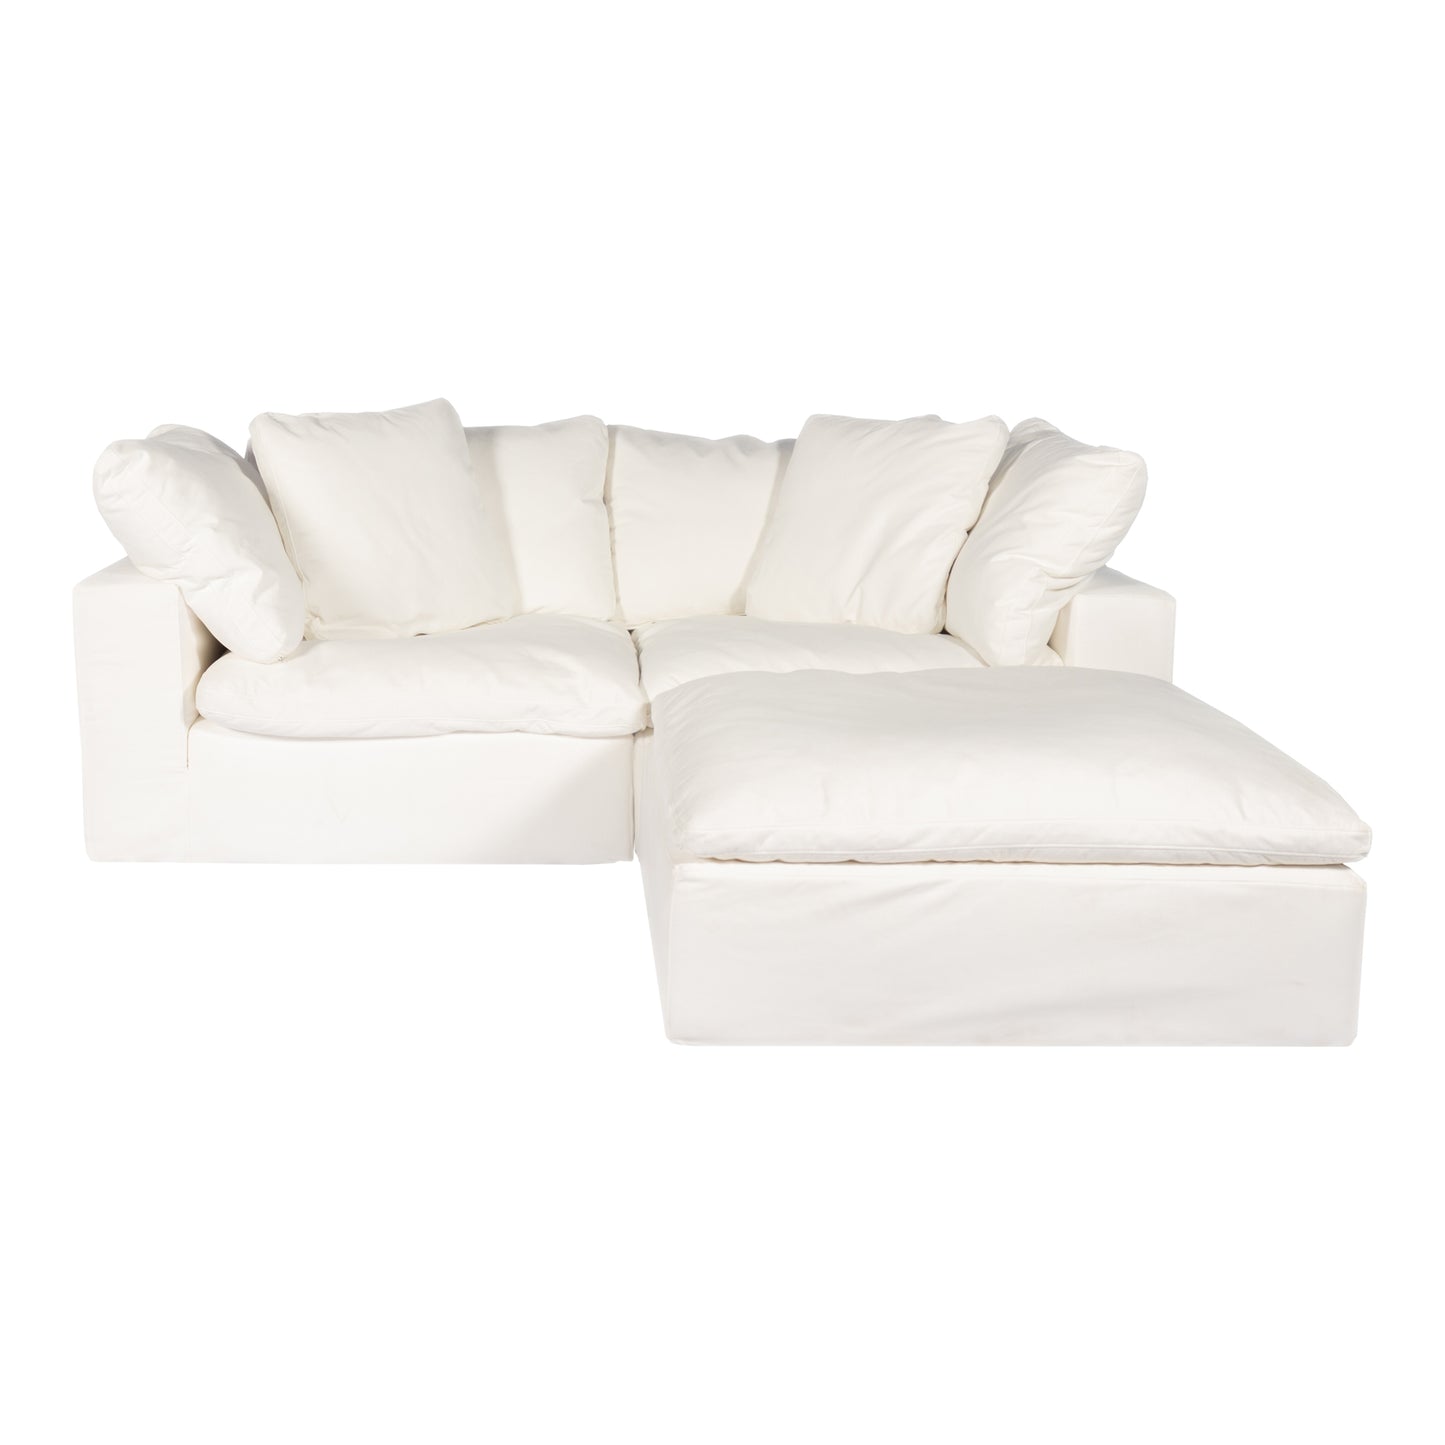 Clay Nook Modular Sectional Livesmart Fabric White YJ-1009-05